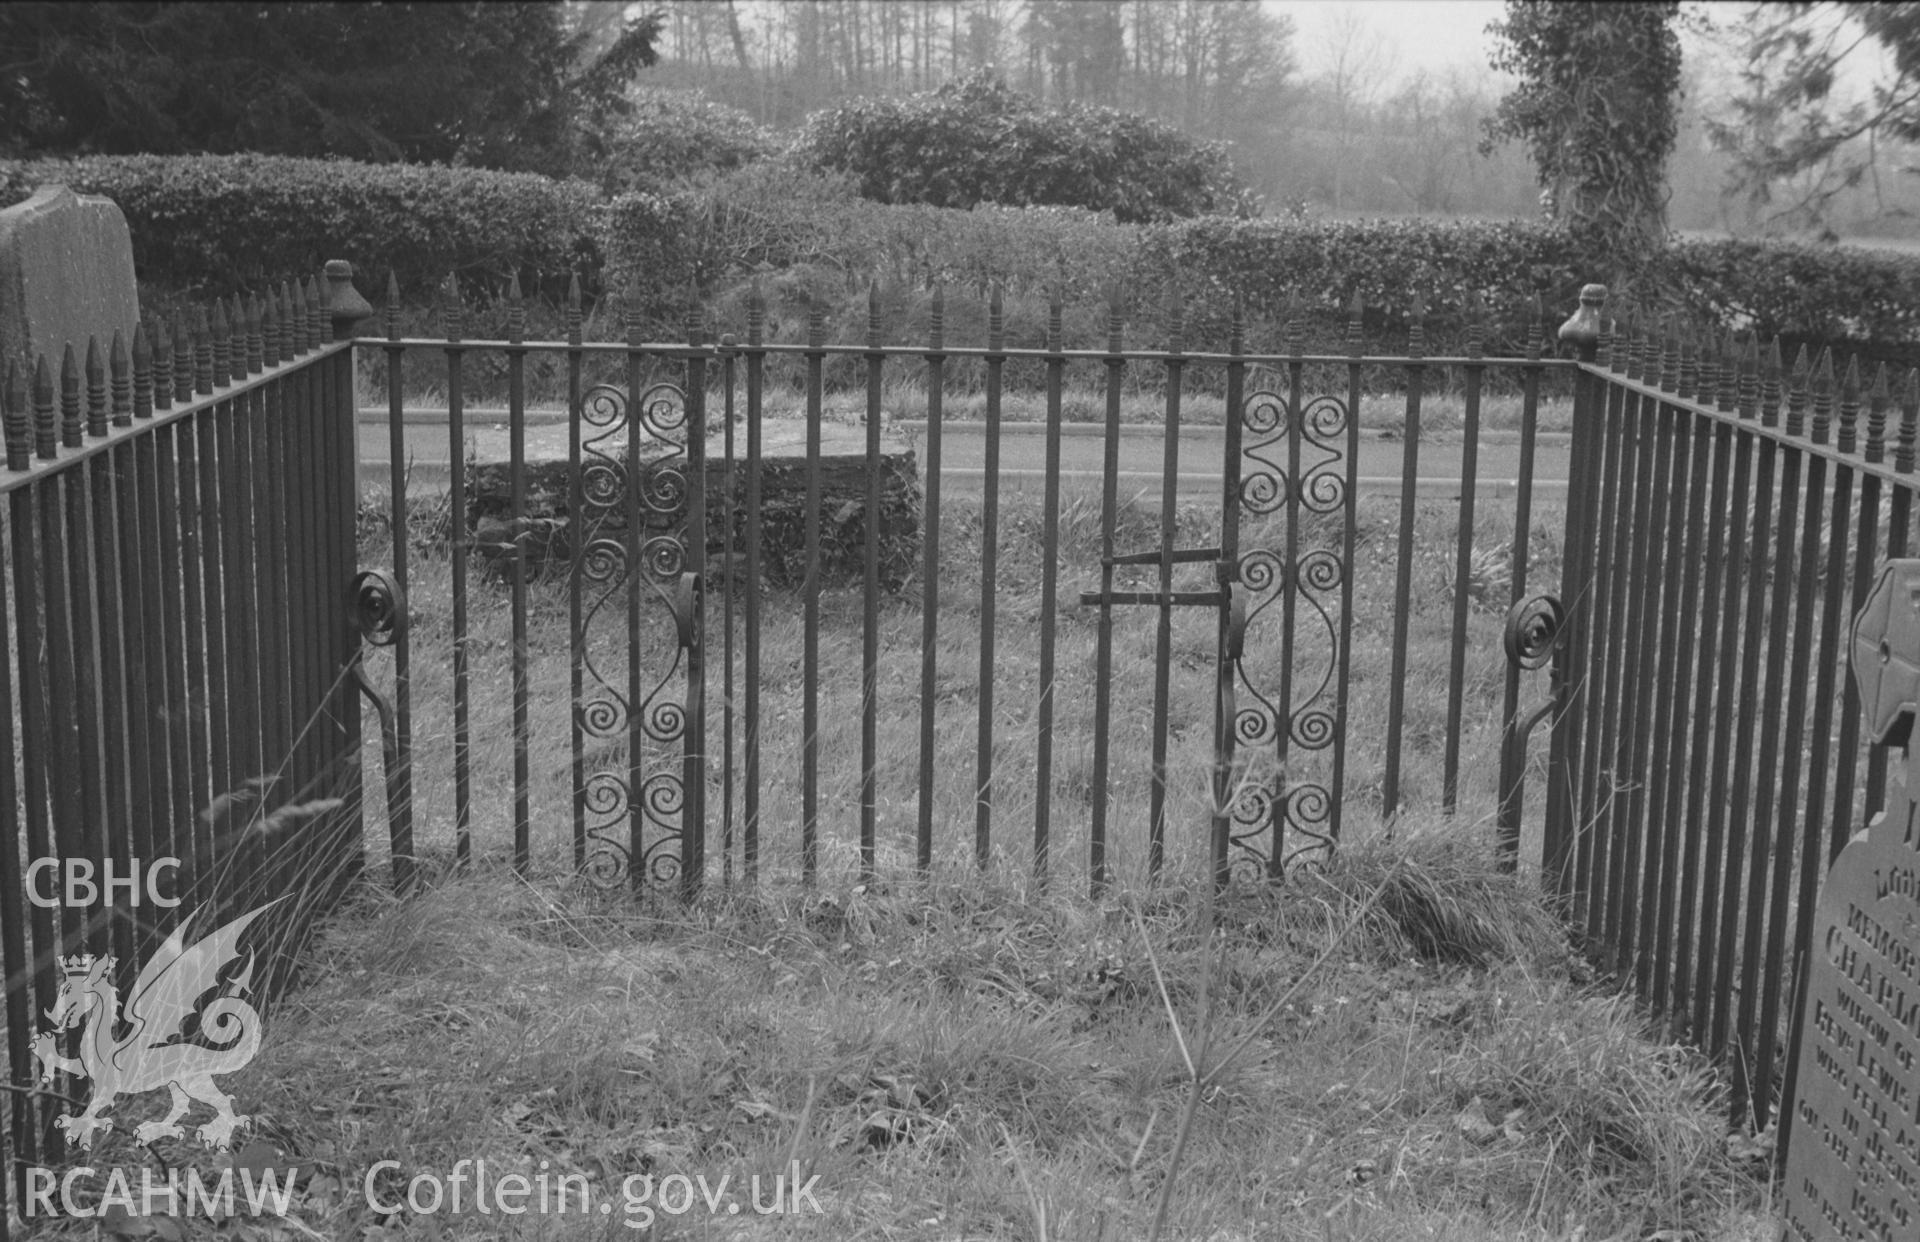 Digital copy of a black and white negative showing wrought iron grave enclosures in churchyard at St Hilary's Church, Trefilan. Photographed by Arthur O. Chater on 11th April 1967 from Grid Reference SN 550 572.